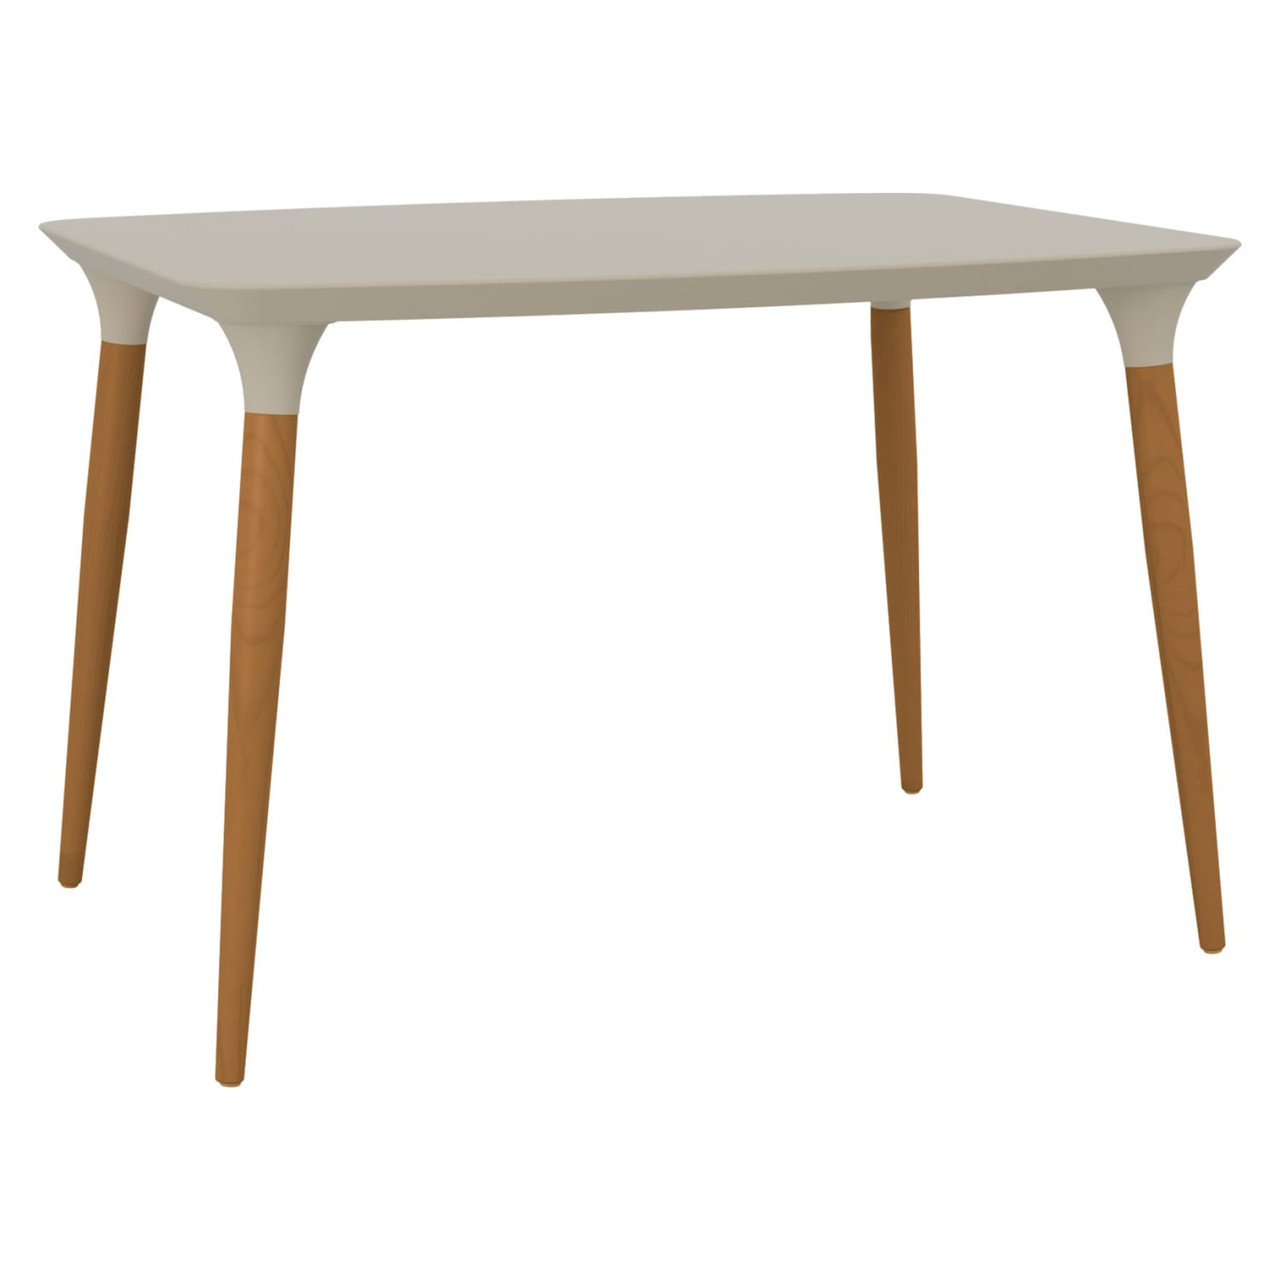 HomeDock 45.47”  Dining Table in Off White and Cinnamon